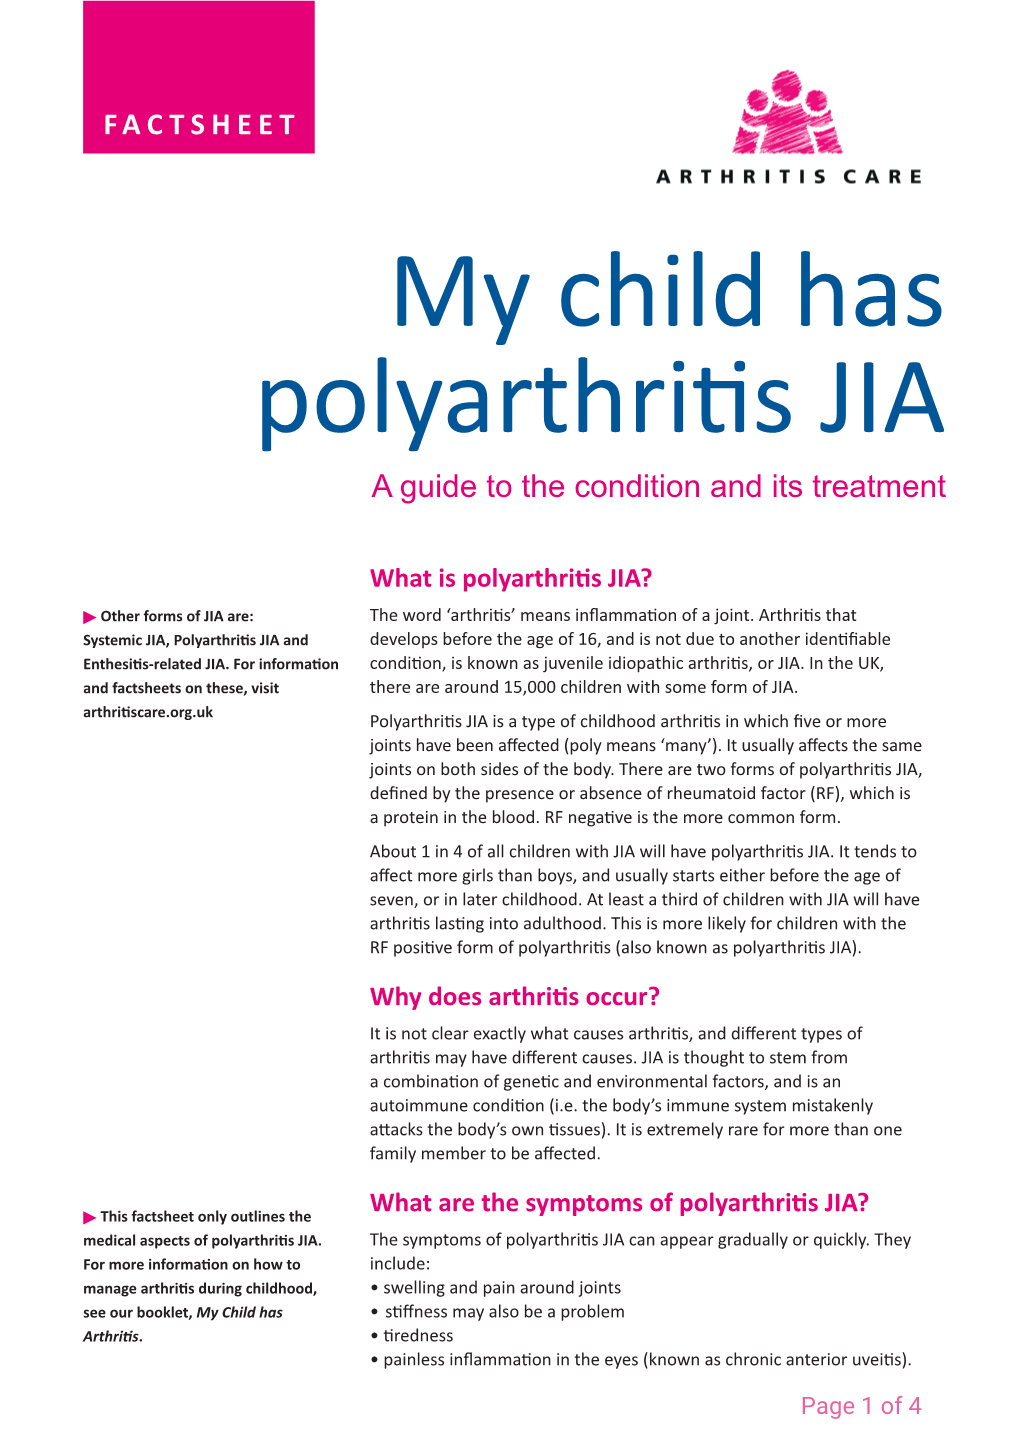 My Child Has Polyarthritis JIA Factsheet How Is It Diagnosed? There Is No Definitive Test to Diagnose Polyarthritis JIA, and Diagnosis Can Take a While